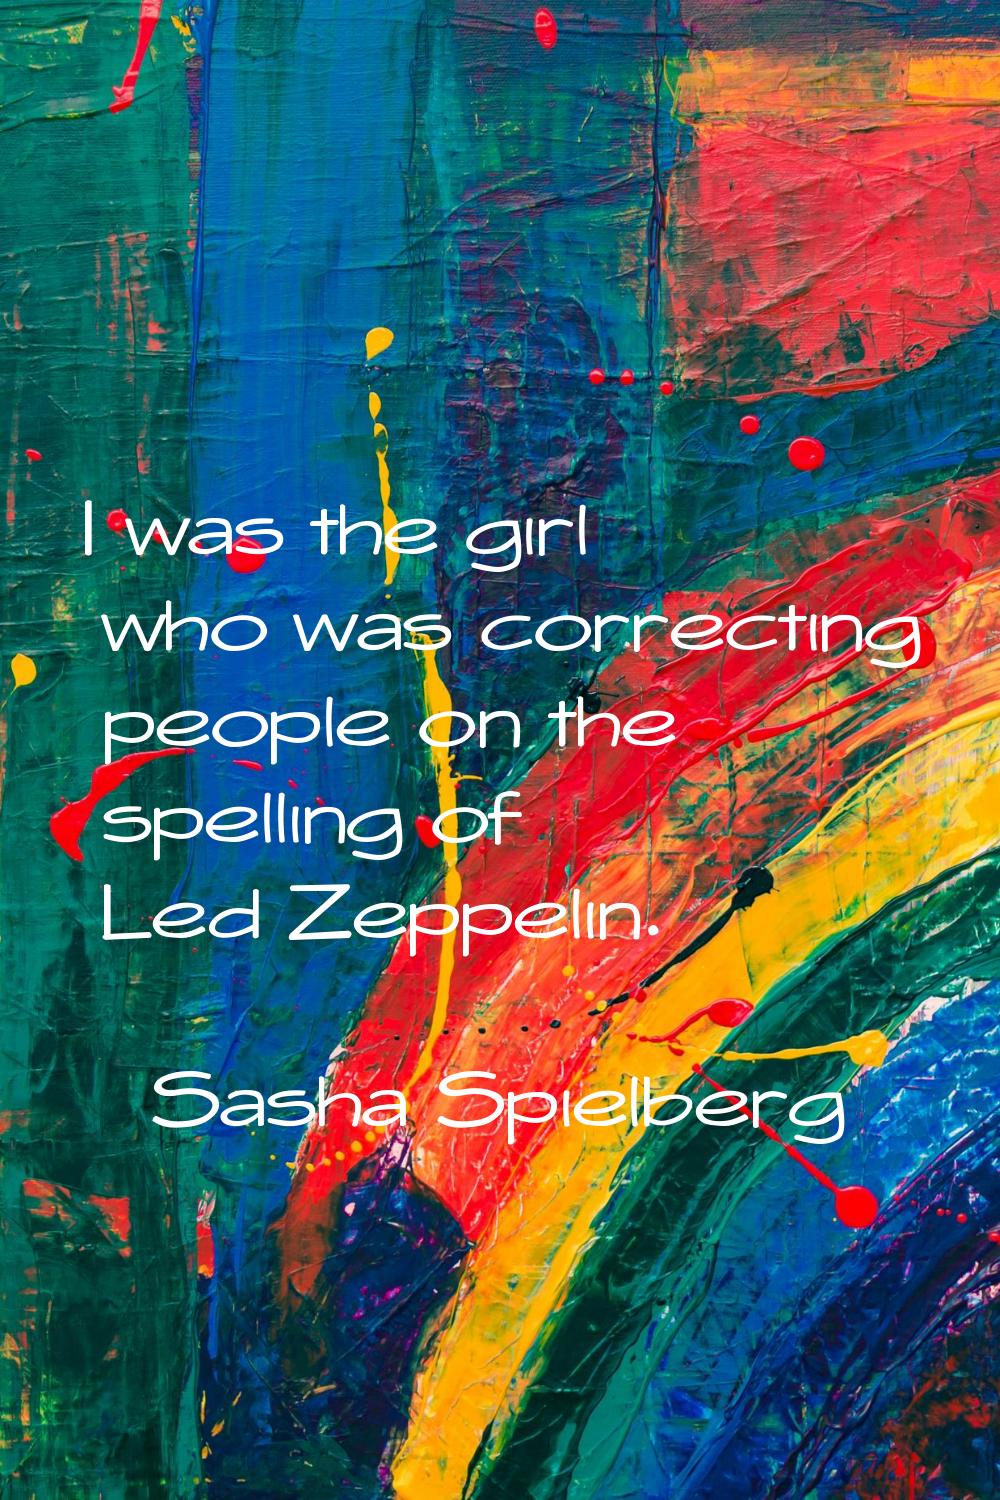 I was the girl who was correcting people on the spelling of Led Zeppelin.